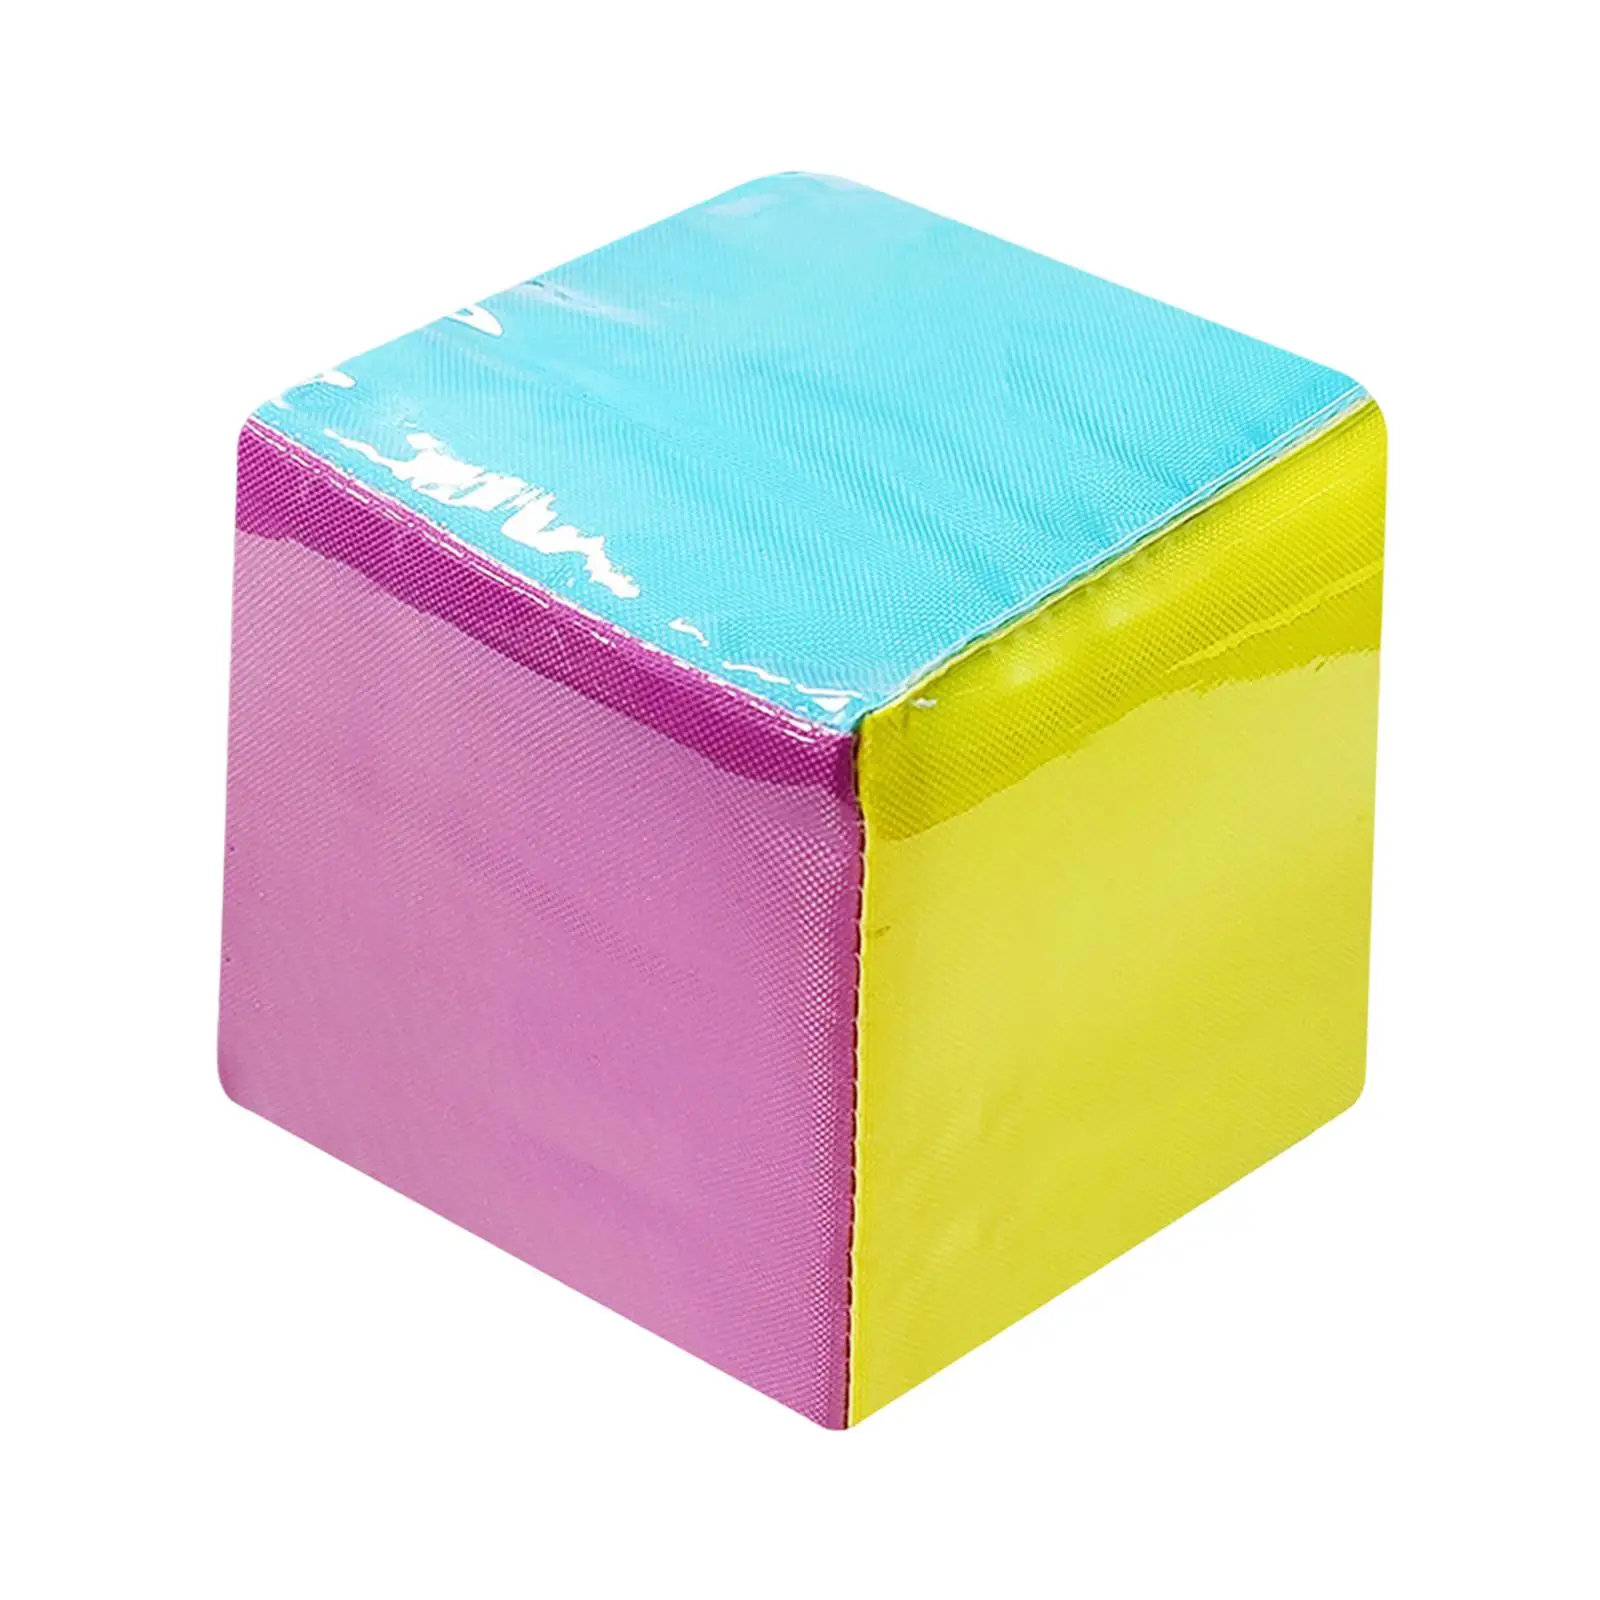 Early Education Learning Cubes Props Education Playing Dice for Teaching Aid Kindergarten Classroom Blocks Toys Preschool